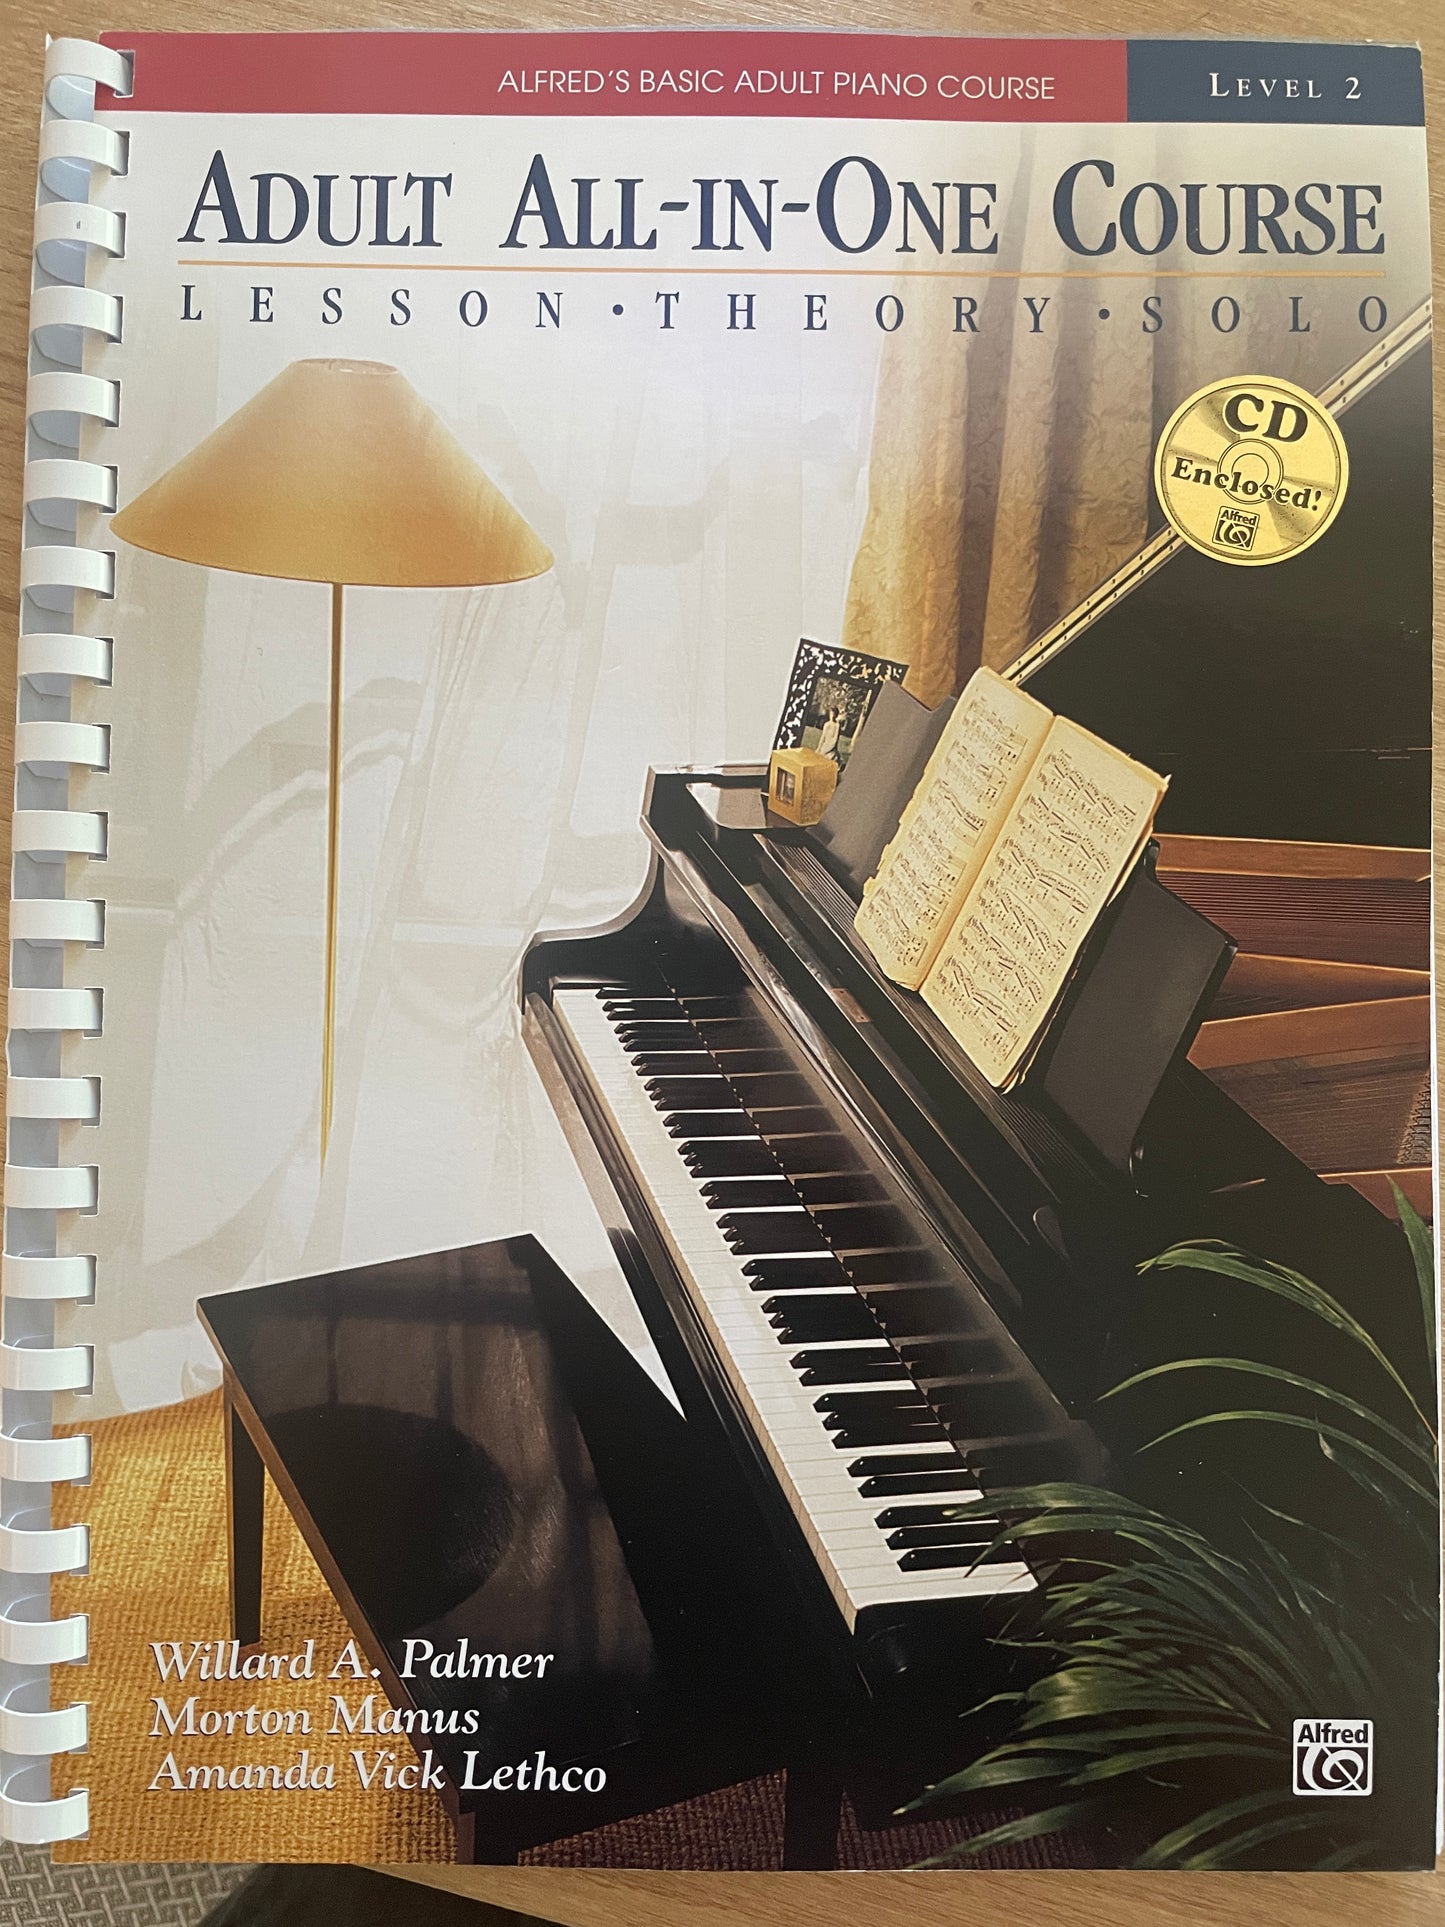 Copy of Alfred's Adult All-In-One Piano Method Level Two WITH CD